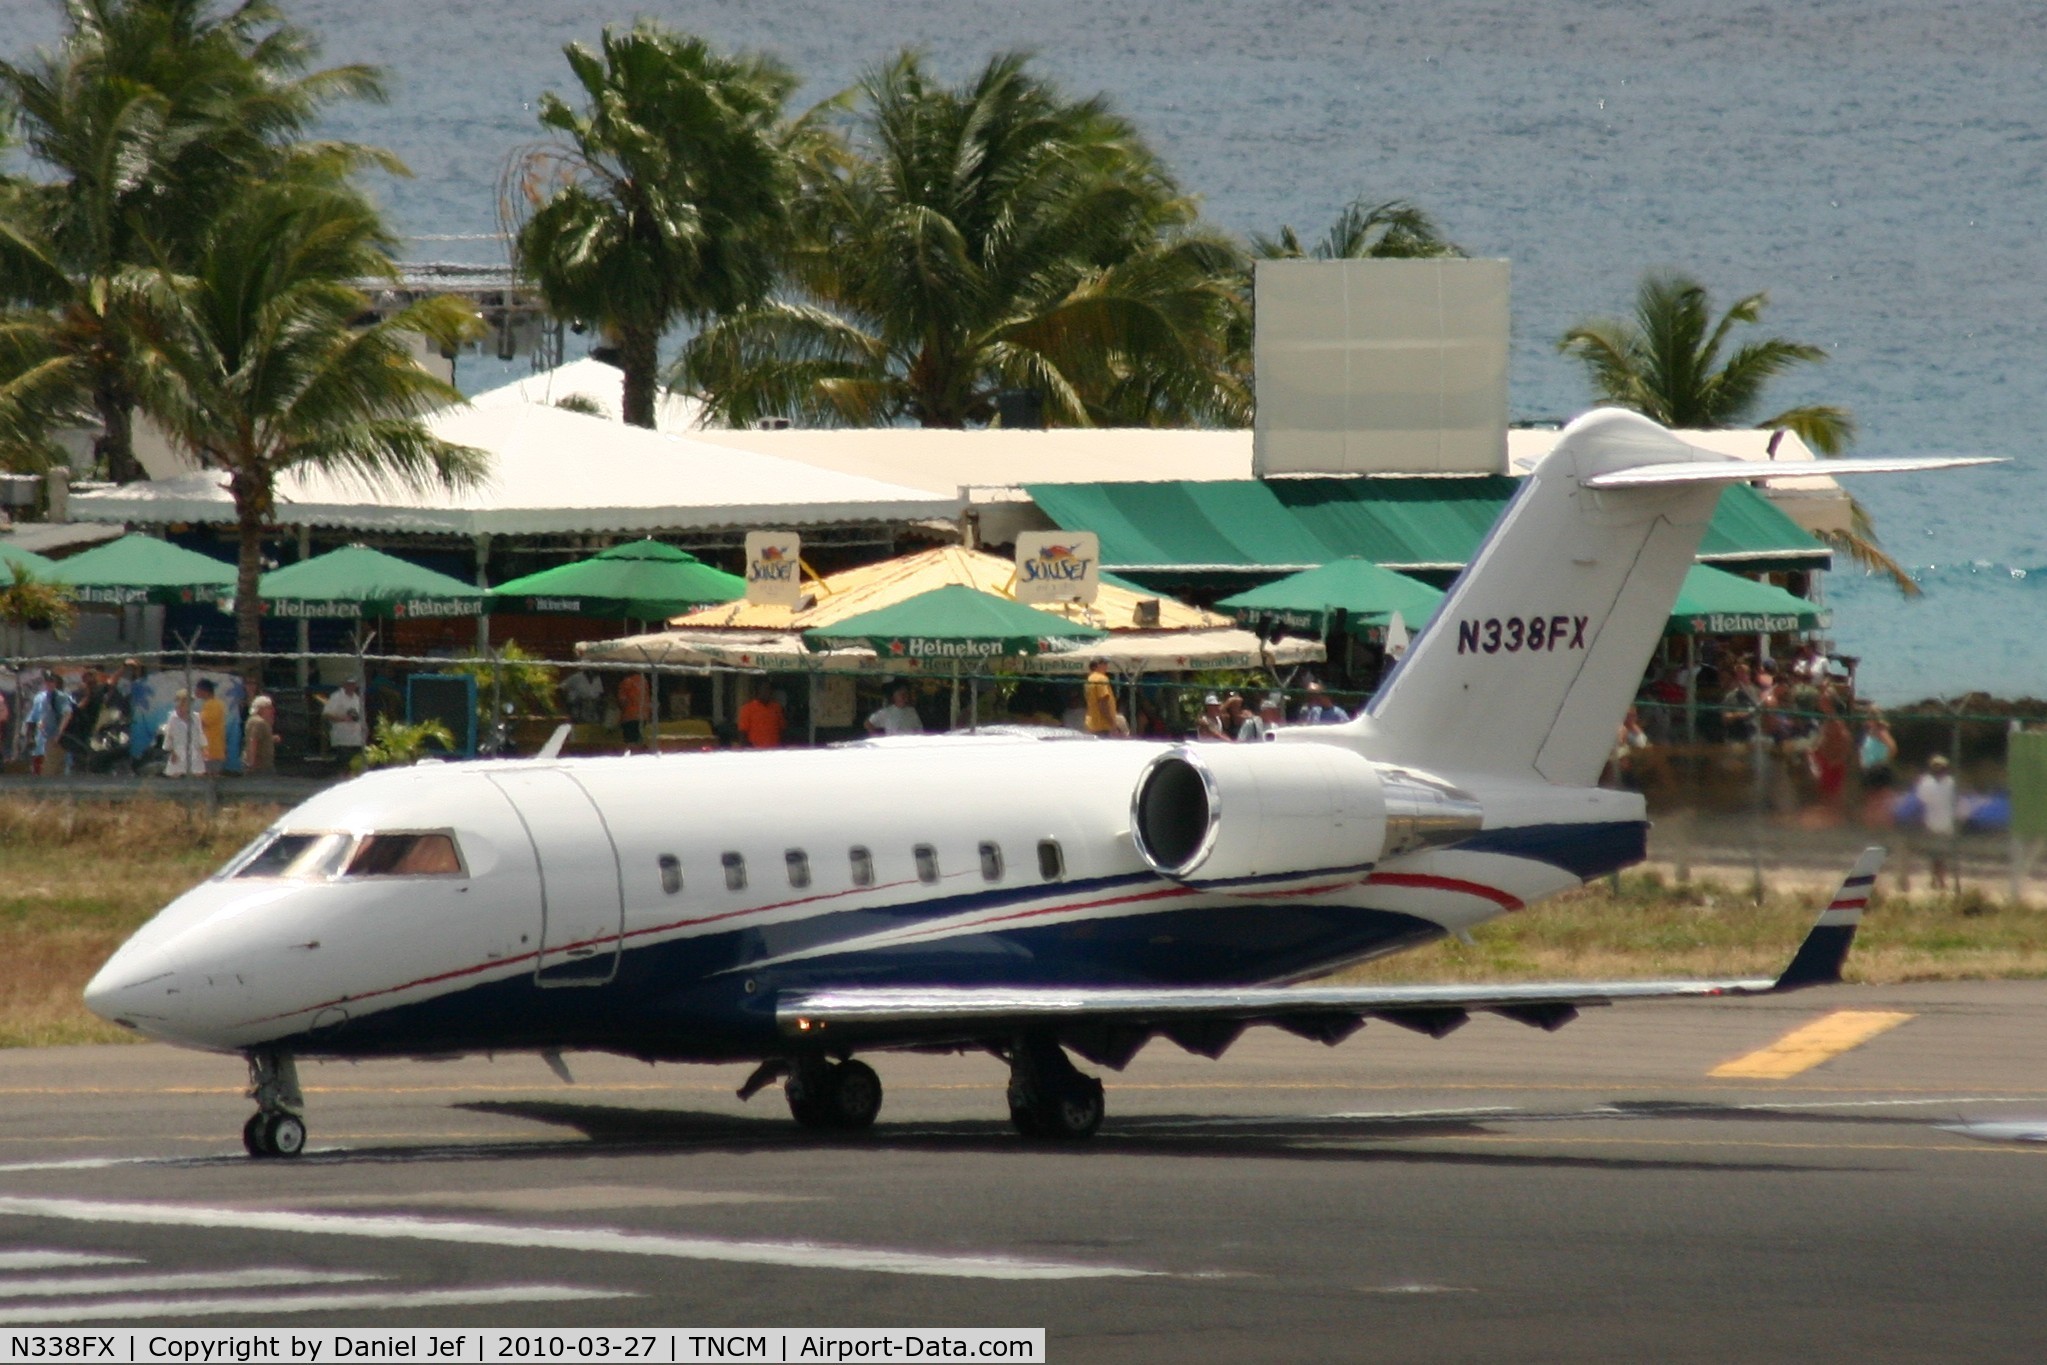 N338FX, 2006 Bombardier Challenger 604 (CL-600-2B16) C/N 5656, N338FX at the lines at TNCM